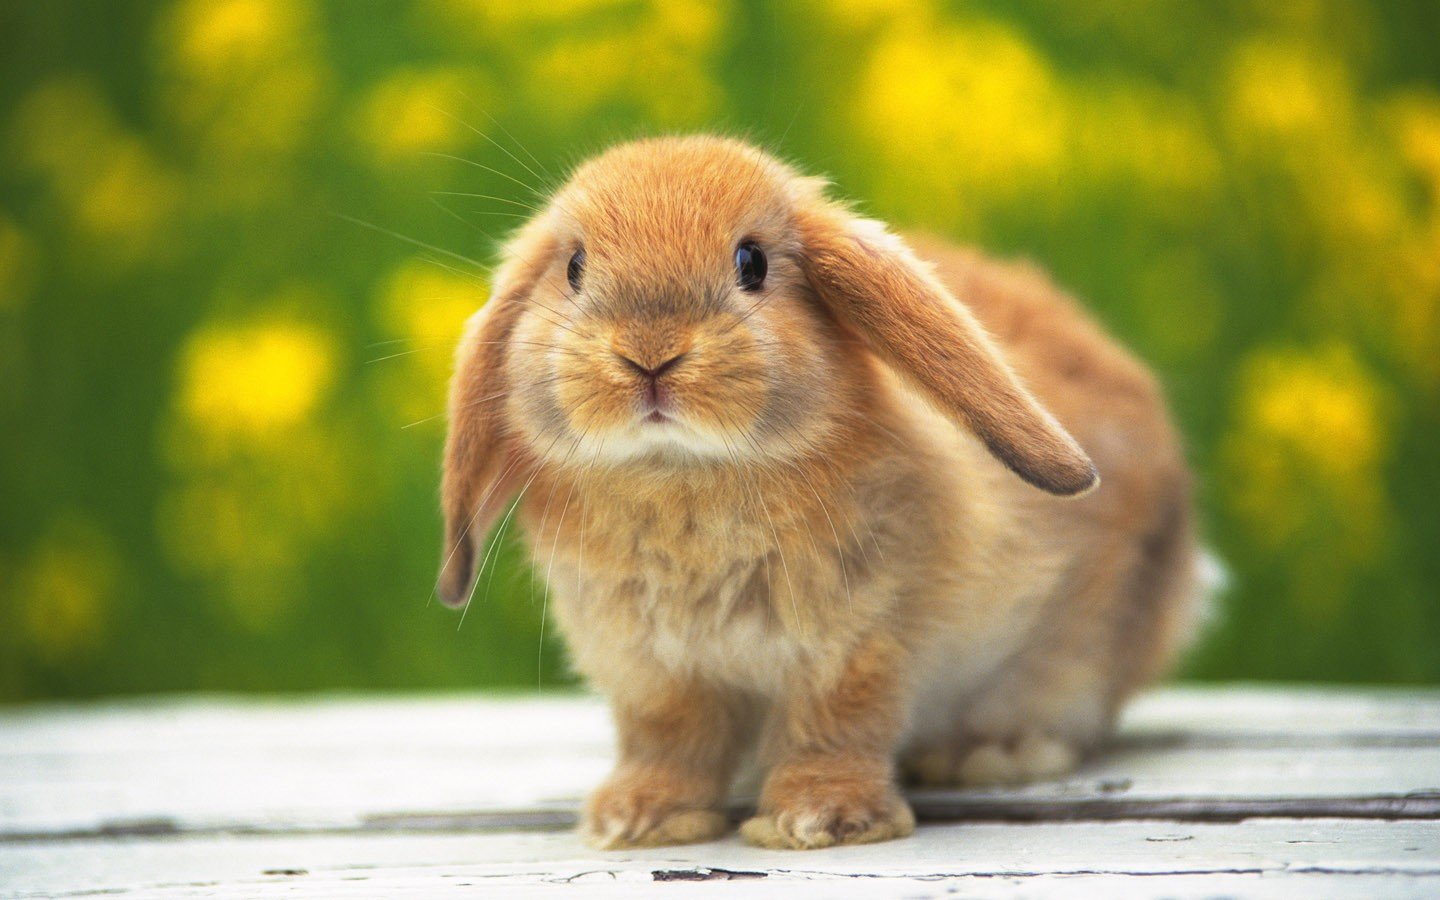 Funny and Cute Rabbits Wallpaper My image 1440x900